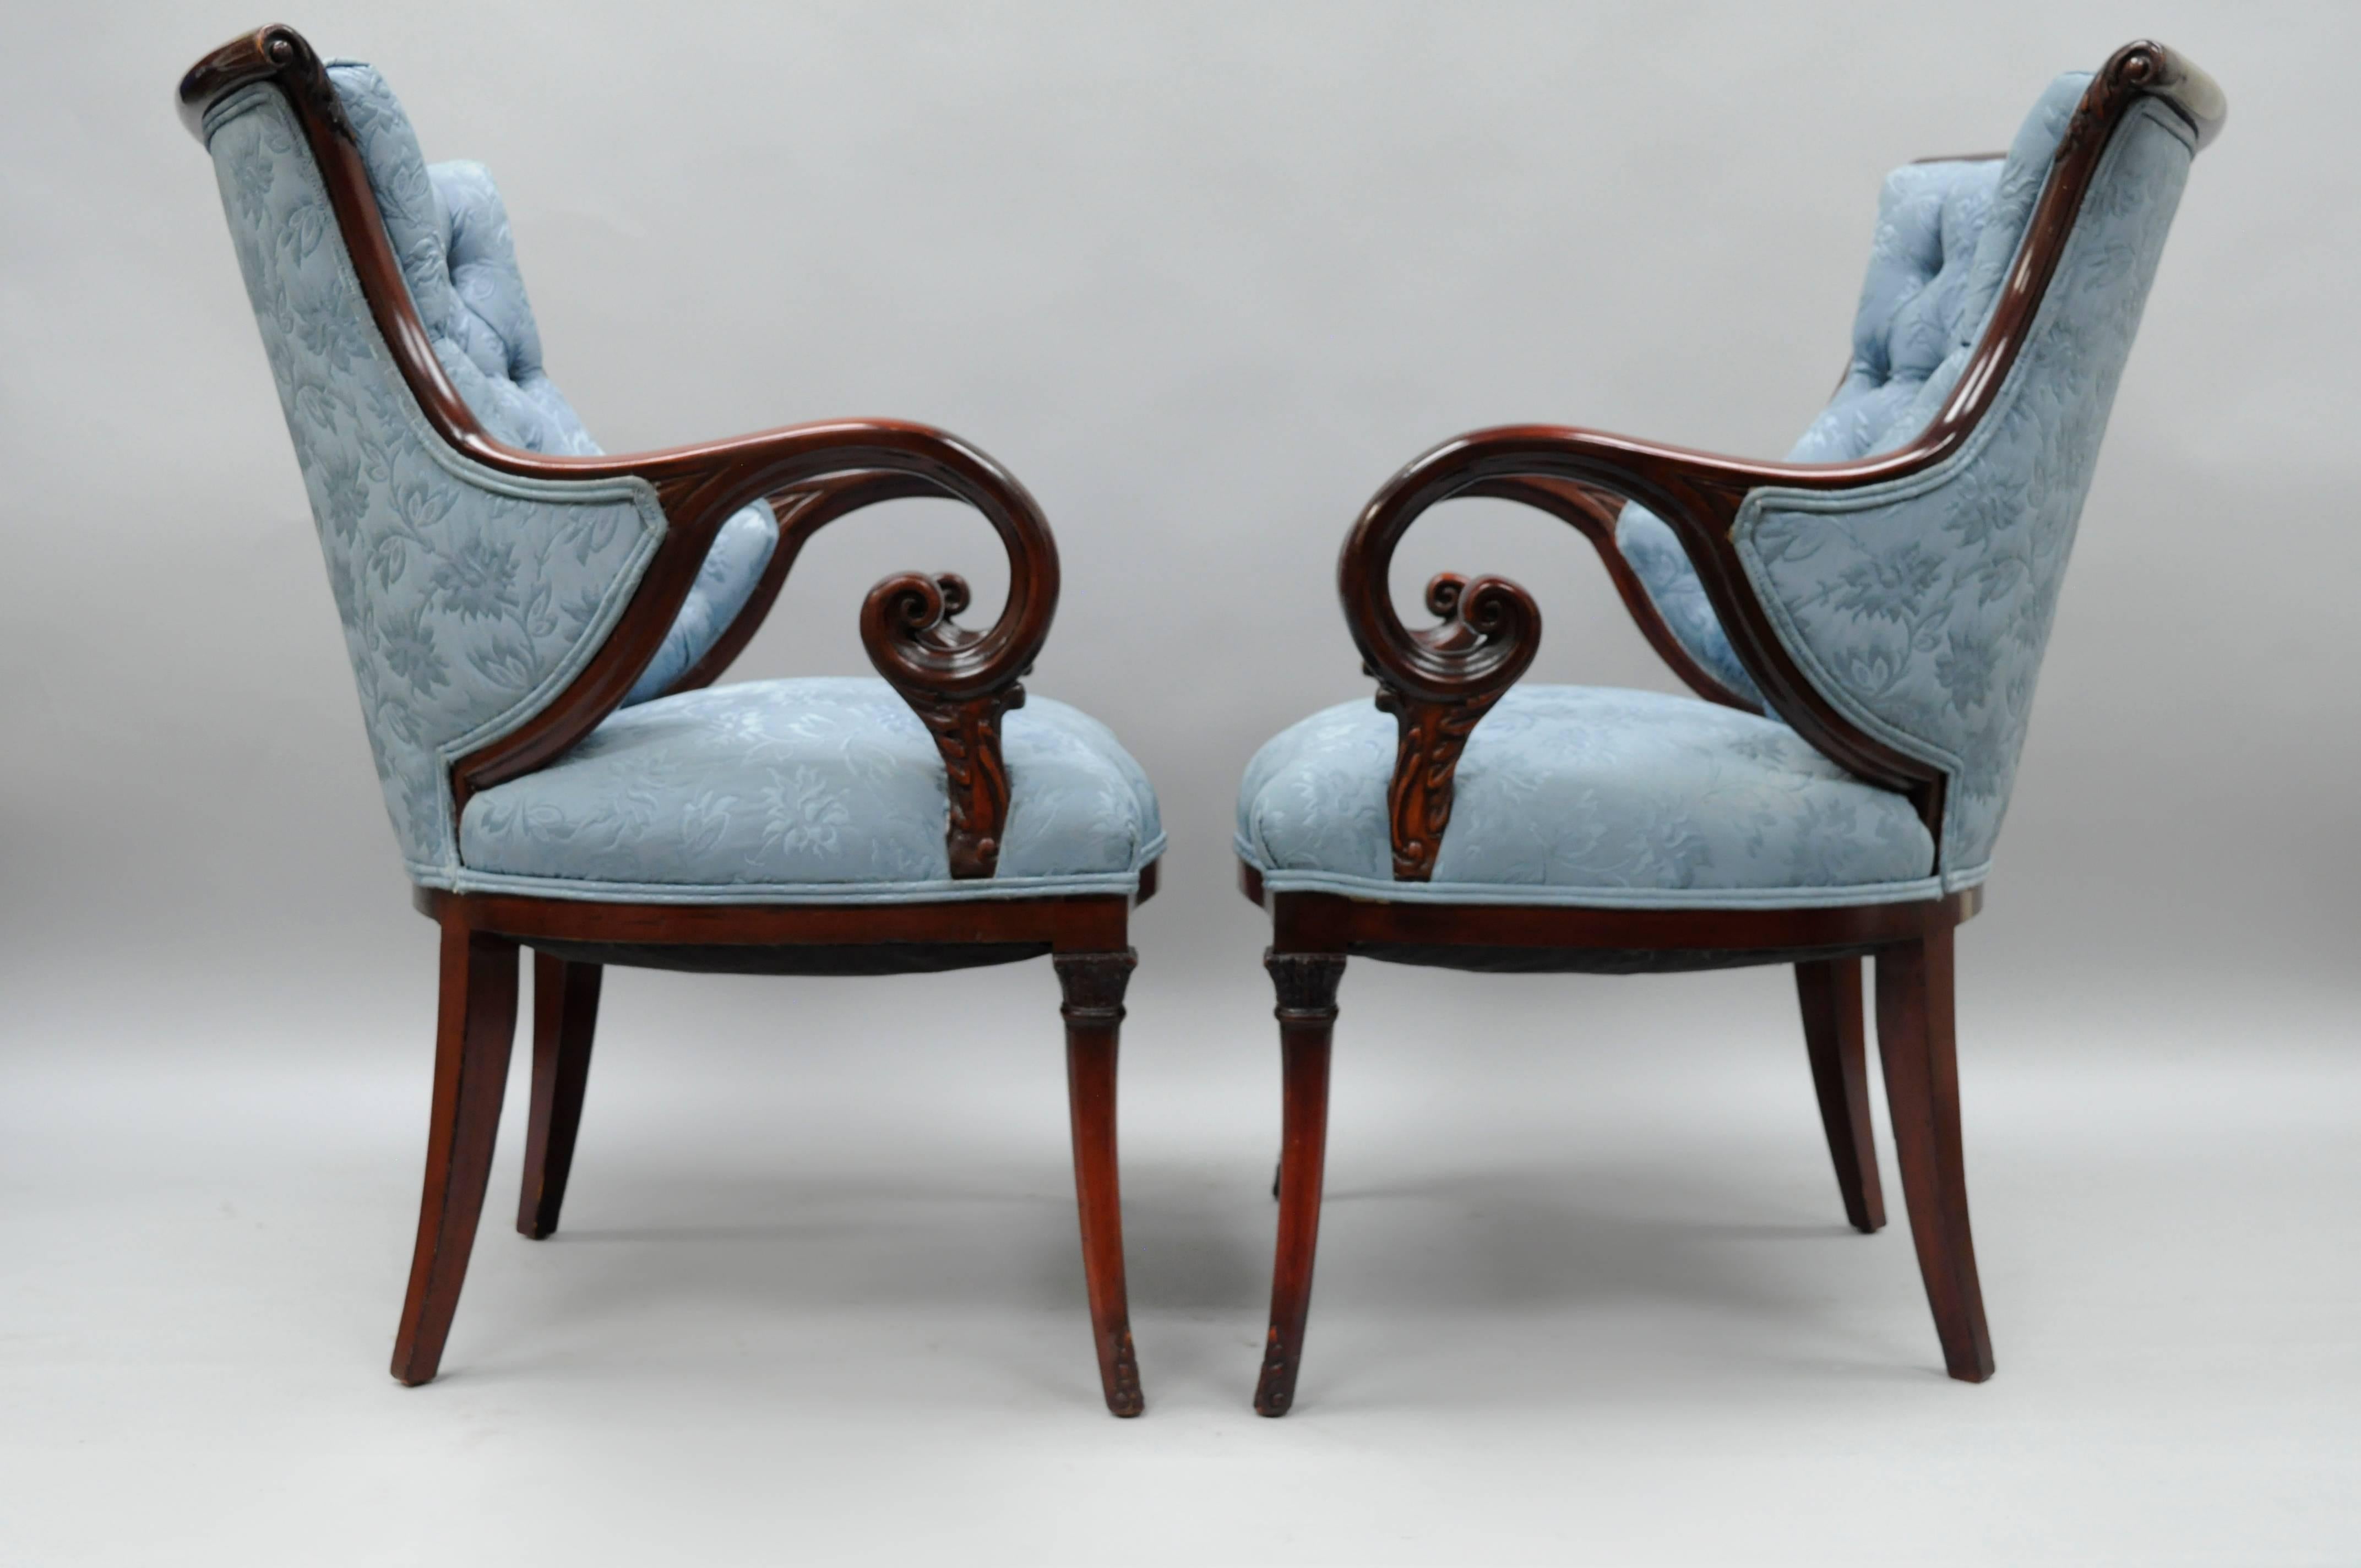 Pair of antique Hollywood Regency blue tufted upholstery mahogany frame living room arm chairs with rosewood and brass inlay attributed to Grosfeld House in the Dorothy Draper style. Chairs feature solid carved mahogany wood frames, rosewood inlay